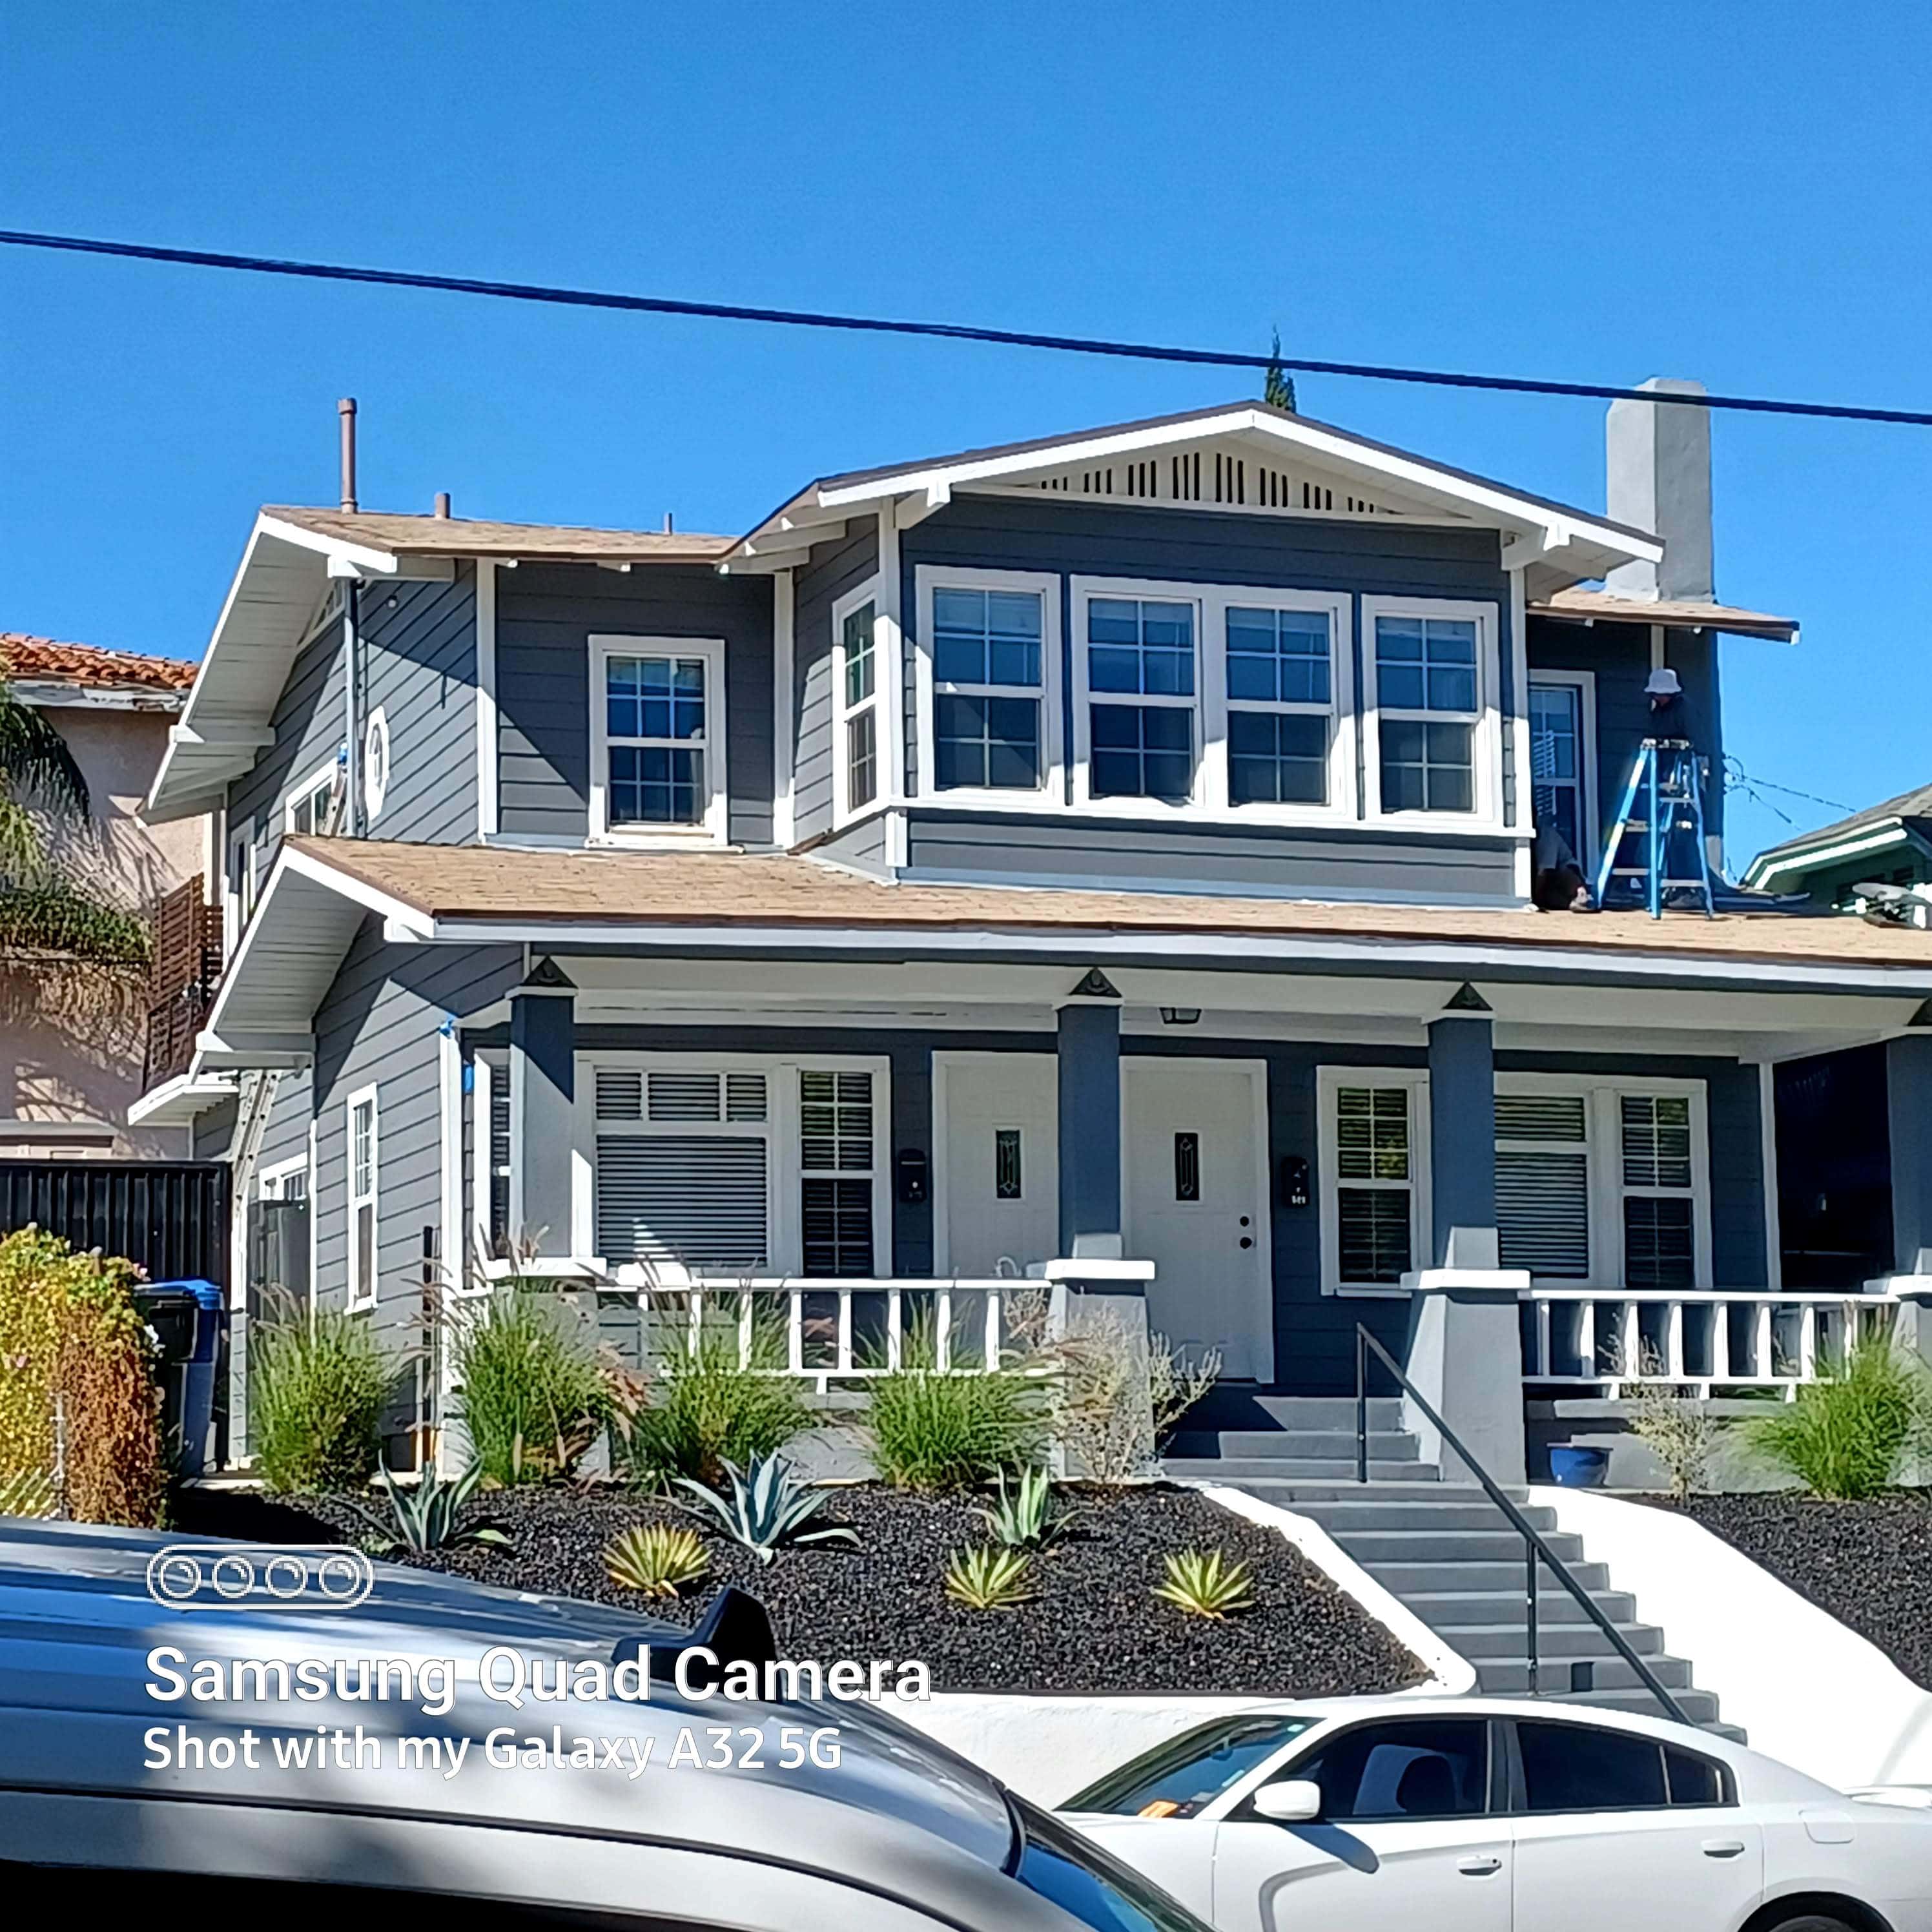 Better View Windows LLC - San Pedro, CA, US, best thing to clean windows with